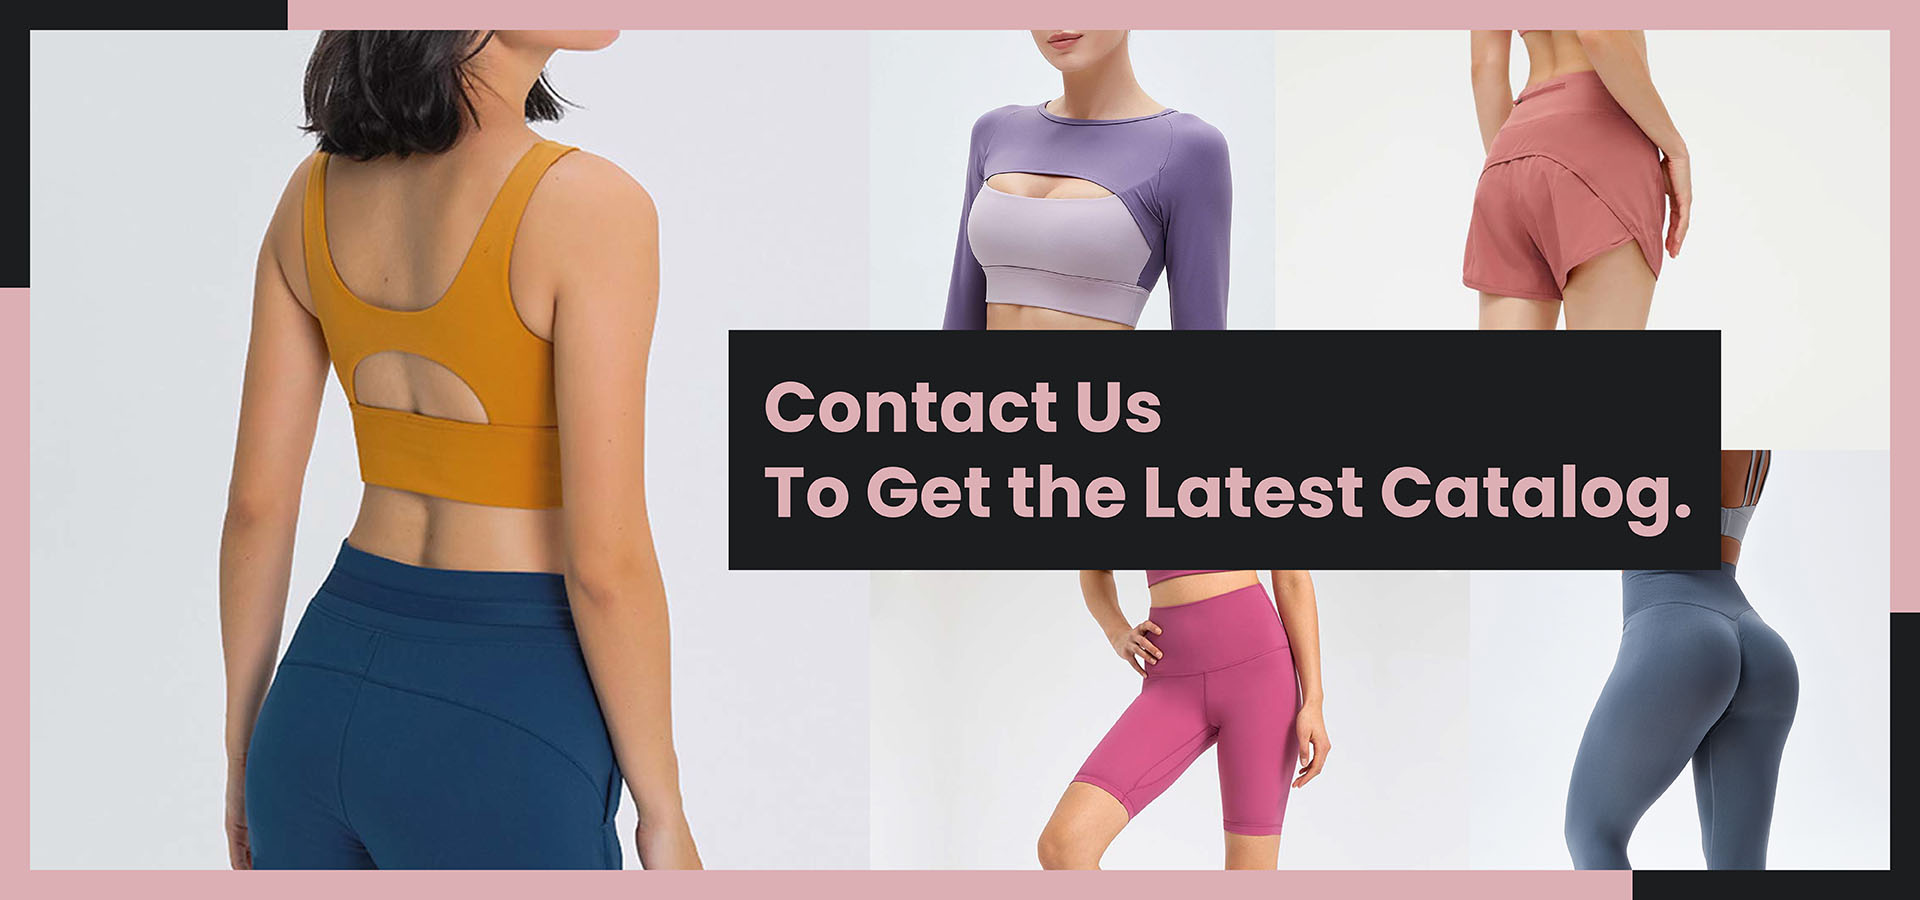 Where to Find a Suitable Yoga Wear Supplier?cid=16